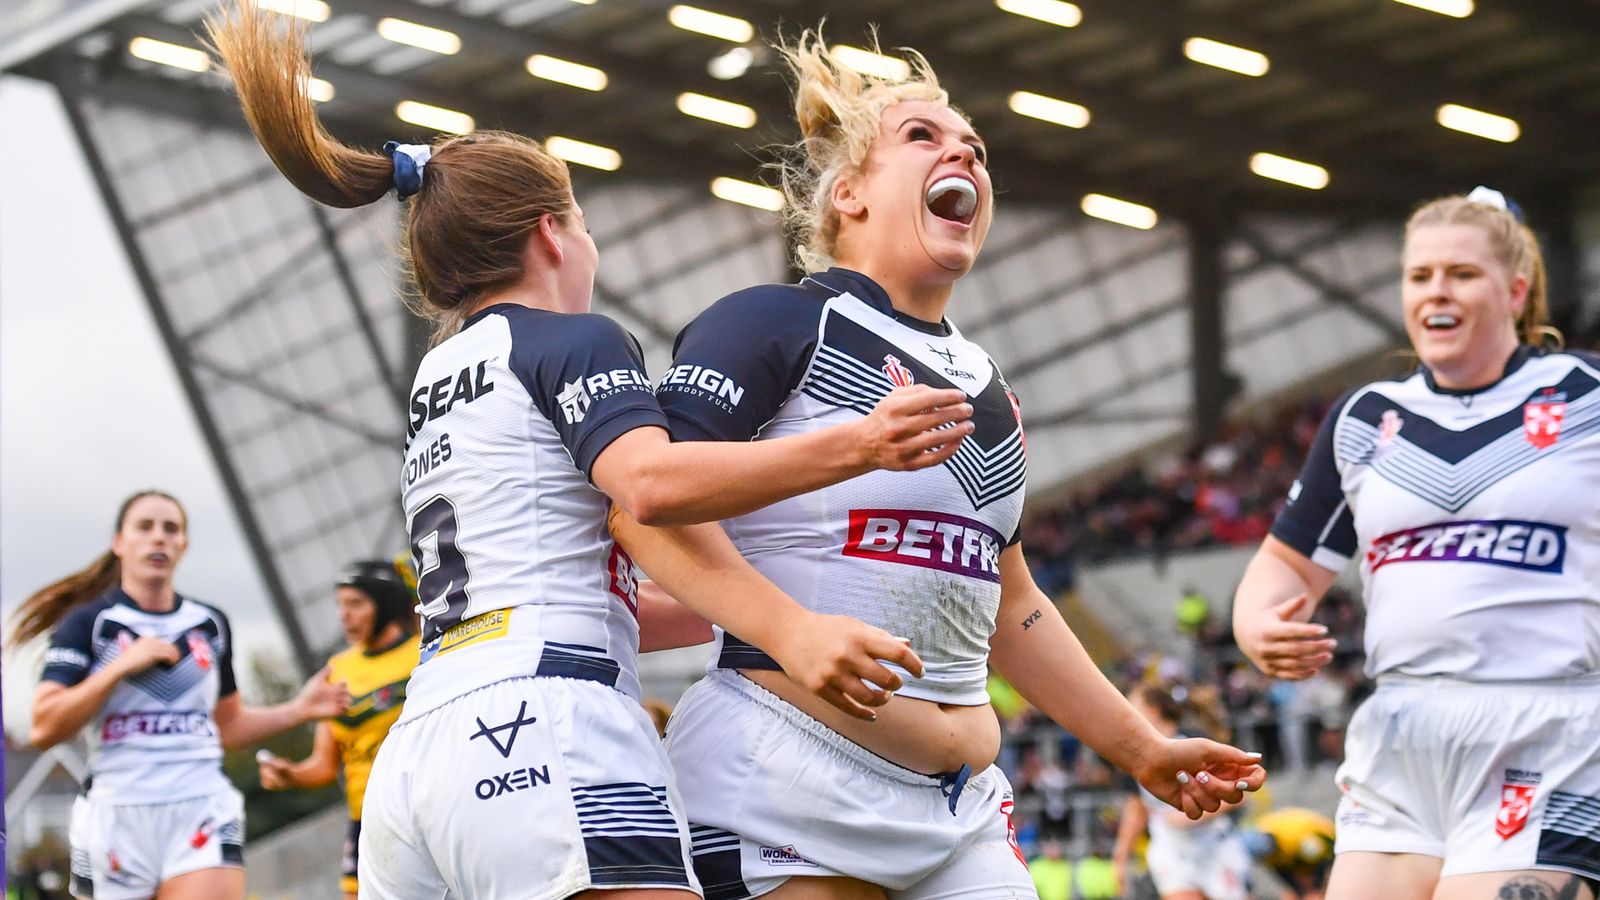 rugby-league-world-cup-chantelle-crowl-on-awesome-win-for-england-women-and-saturday-s-double-header